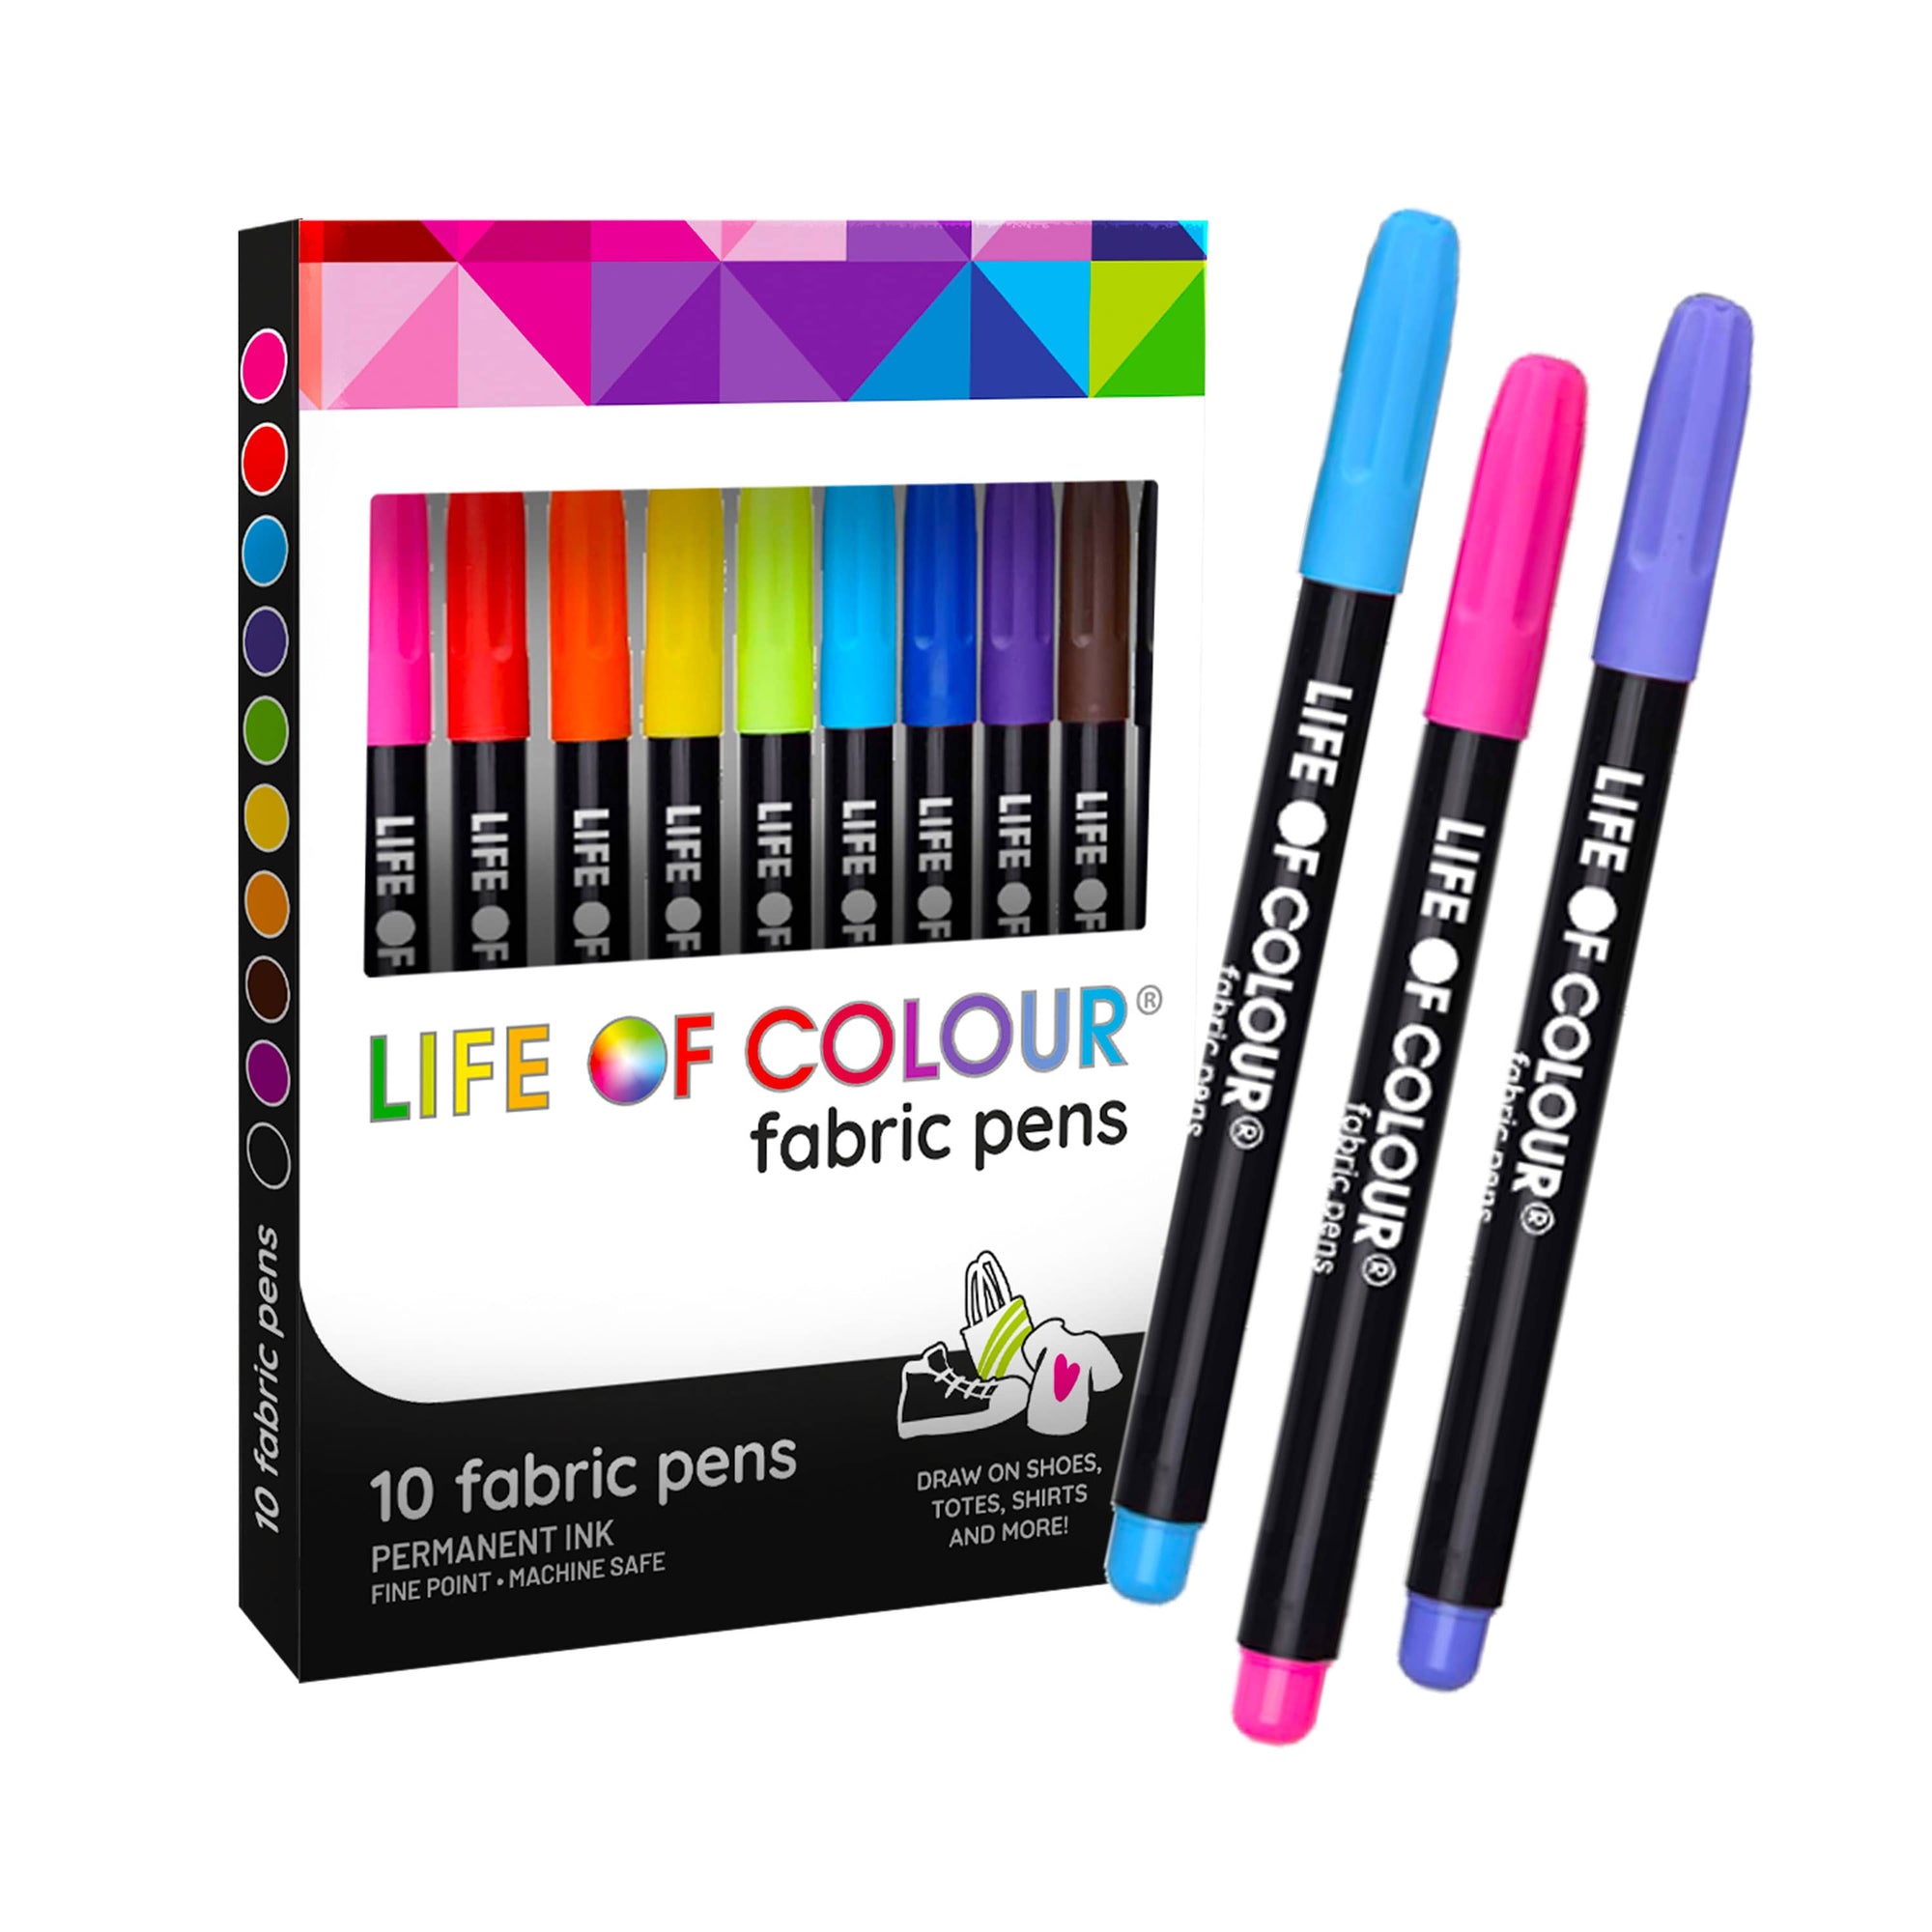  Gain-Art Black Fabric Markers - Dual-Tip Fabric Markers  Permanent for Clothes - Non-Toxic Fabric Paint Pens for Personalizing  Shirts Bags Hats Canvas, and Textiles : Arts, Crafts & Sewing